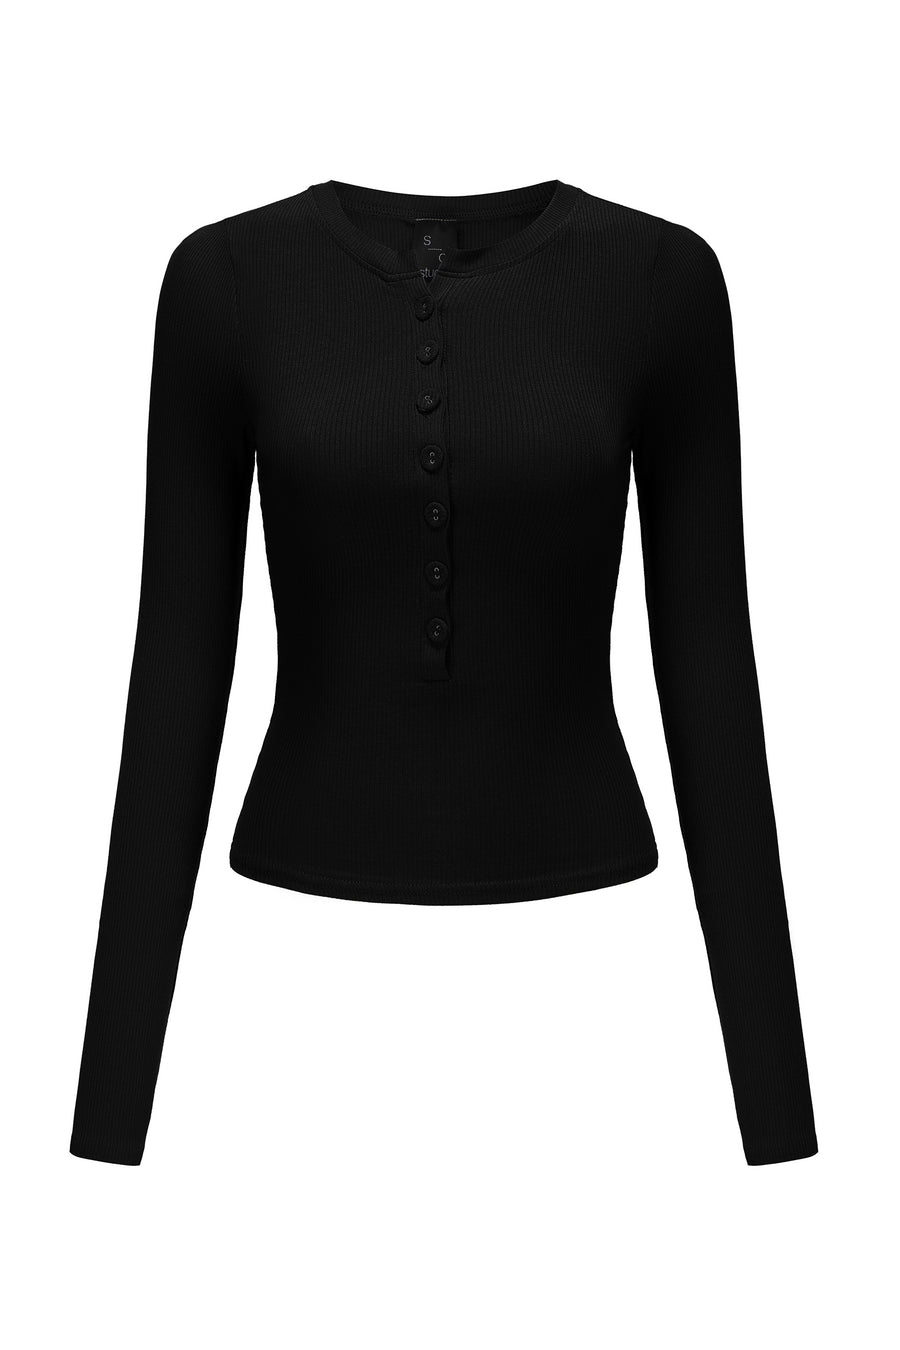 Ava Button Up Top - Black